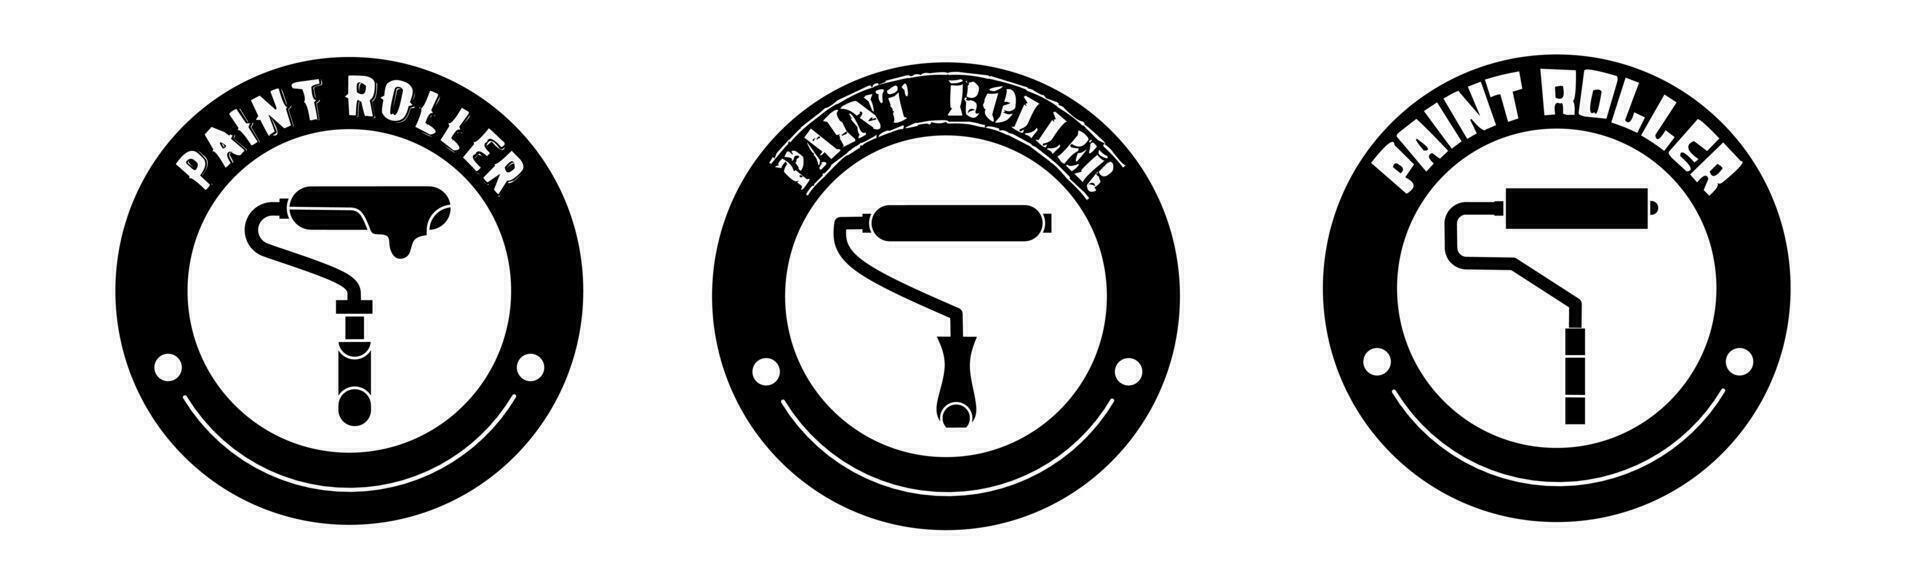 Paint roller product sale icon vector illustration. Design for shop and sale banner business.